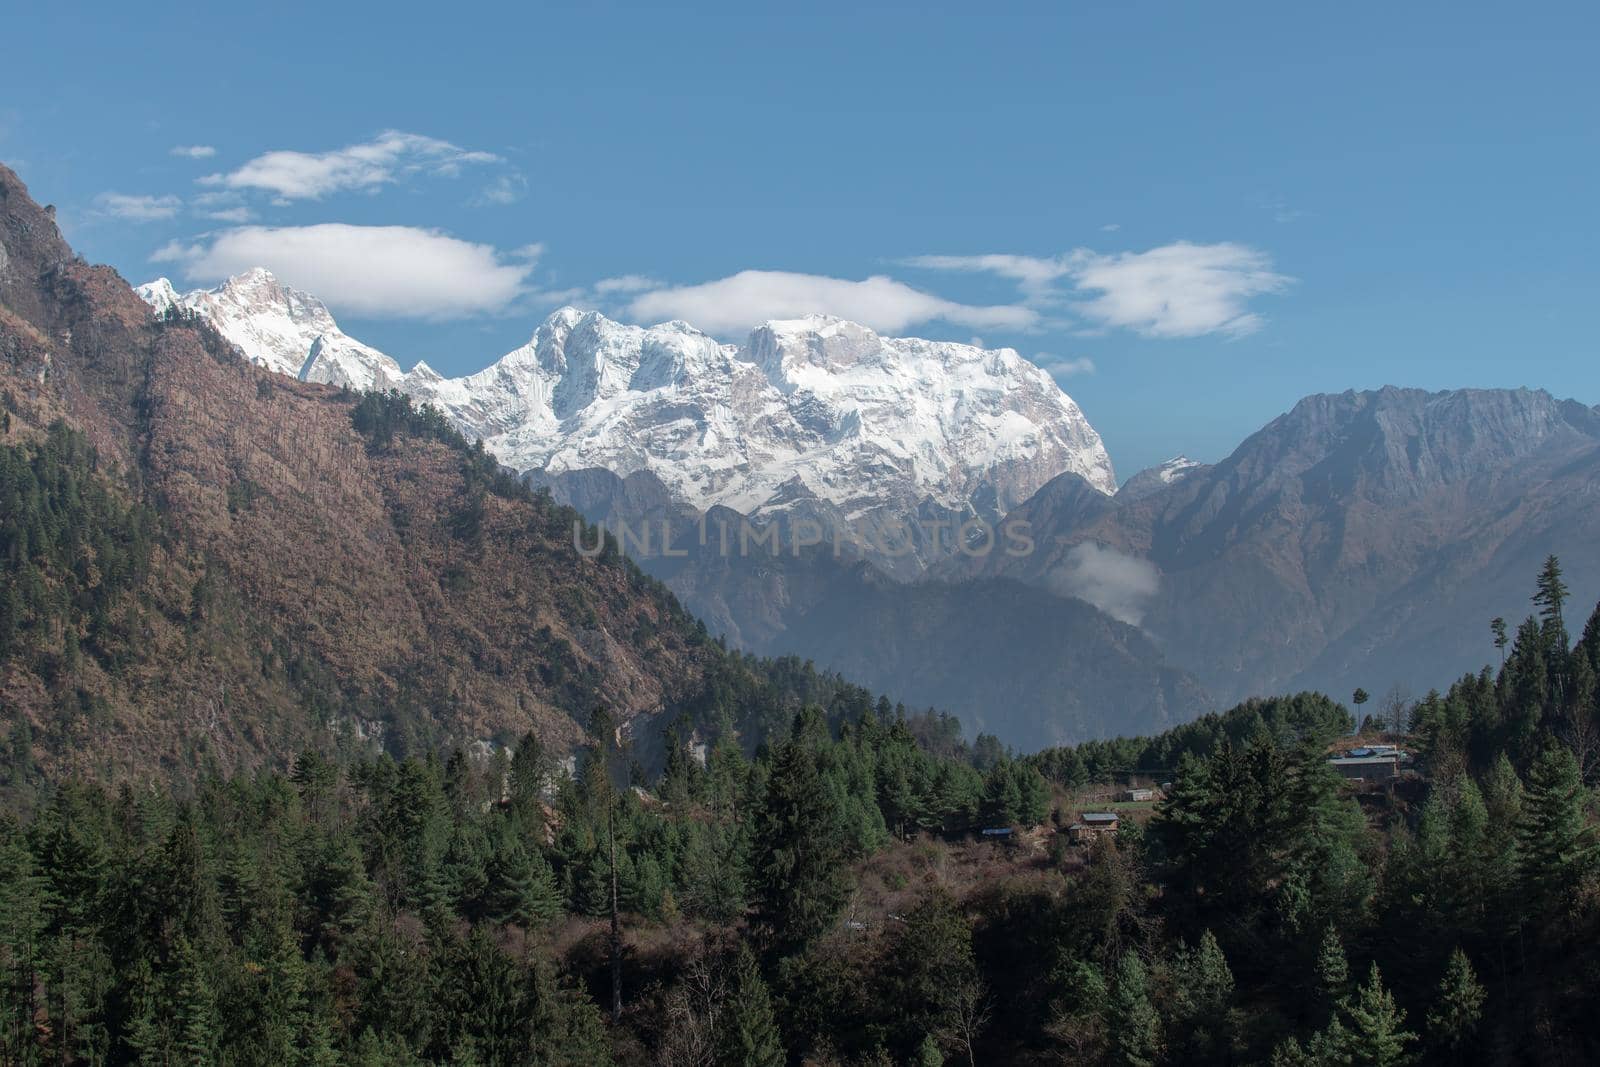 Nepalese mountain ranges along Annapurna circuit by arvidnorberg